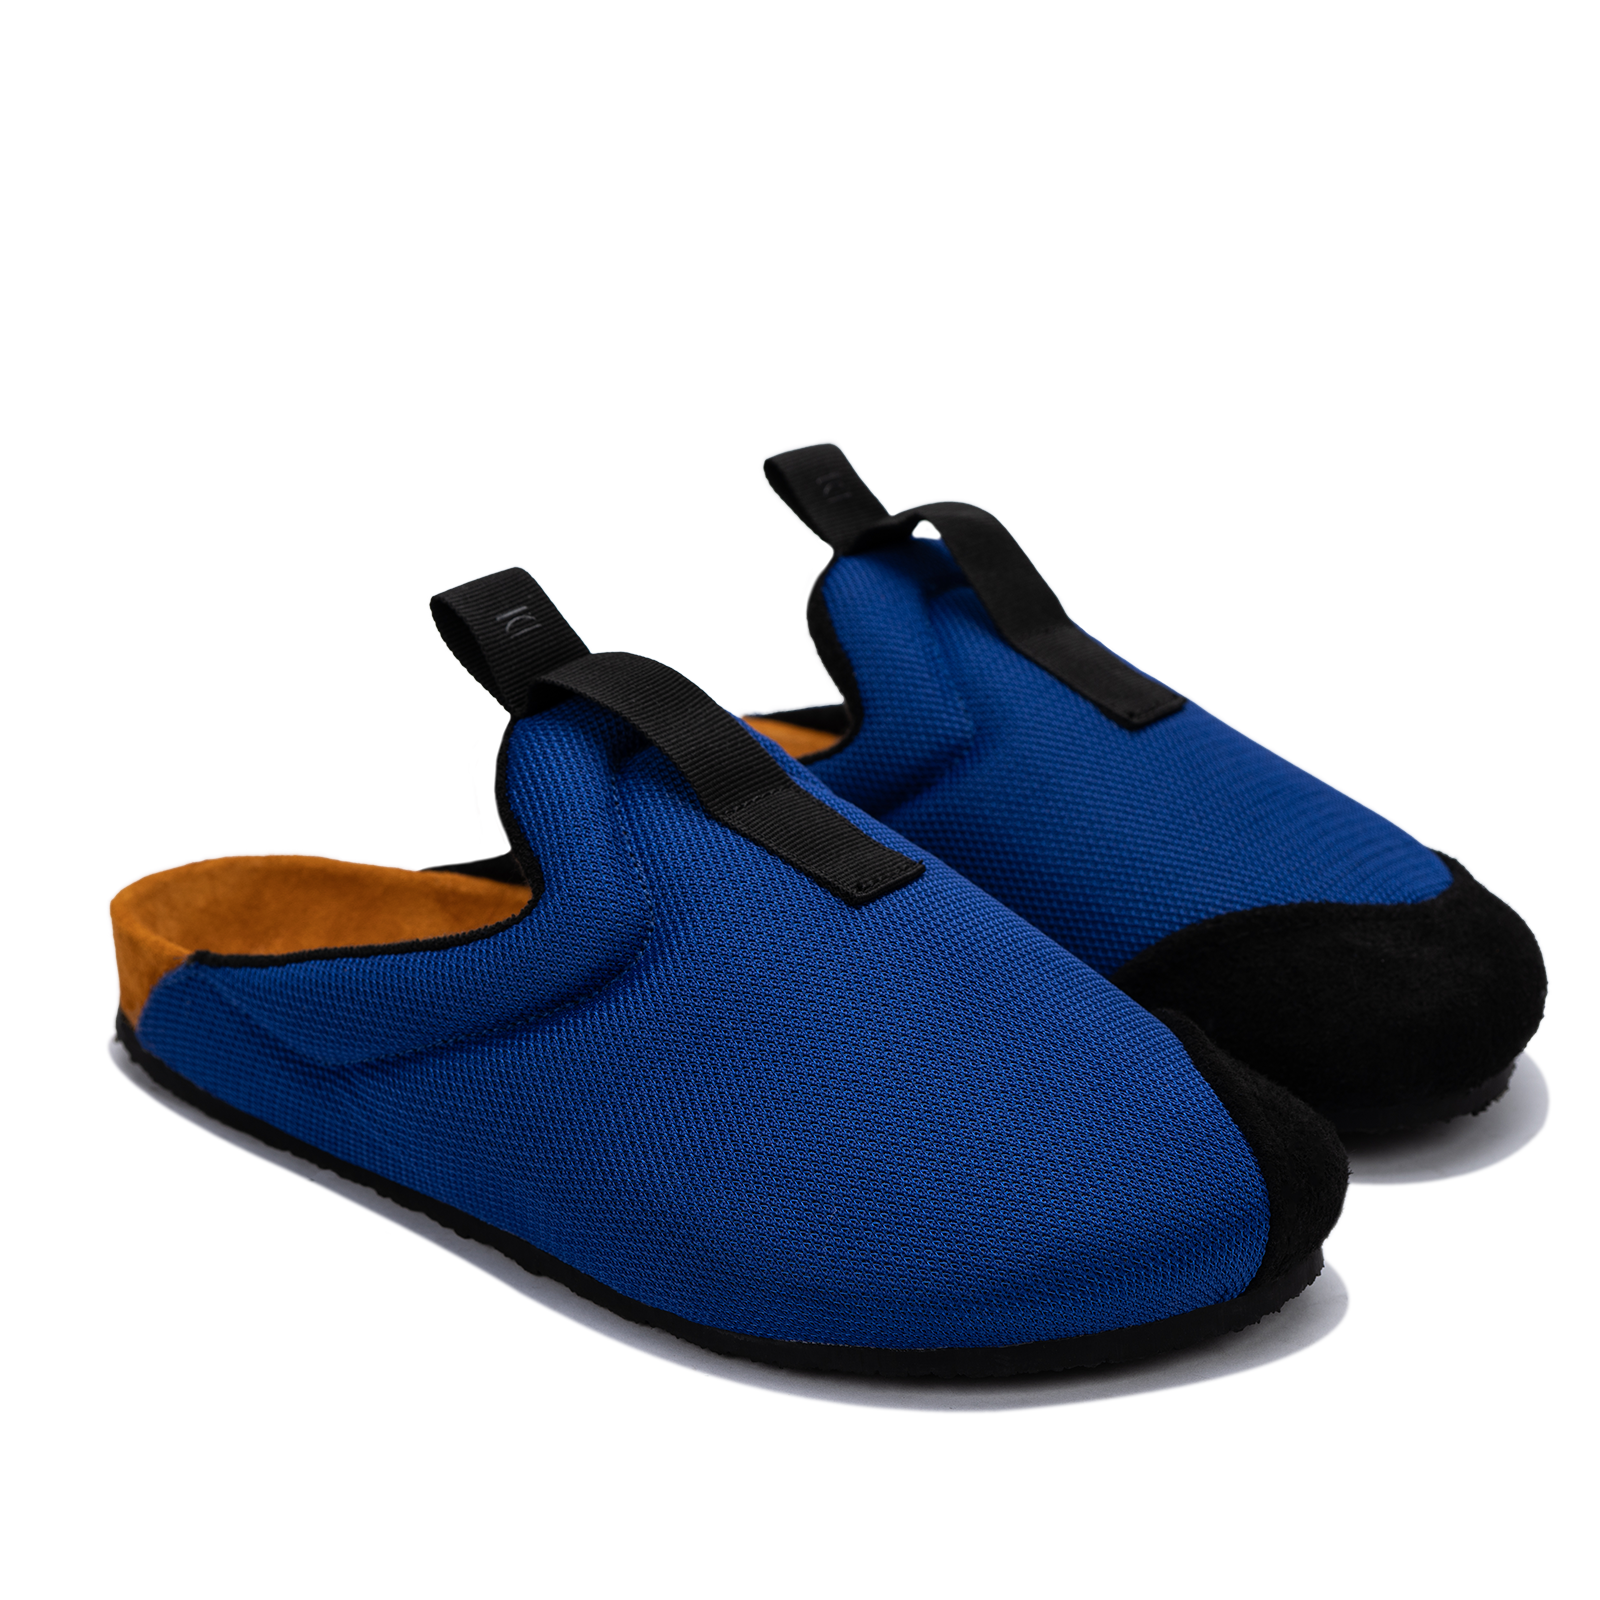 3/4 view Bantha 2.0 Royal is a Mule made of Royal Blue mesh with a Black hairy suede to overlay, cork midsole with suede top lining Black VIbram rubber bottom and woven top pull